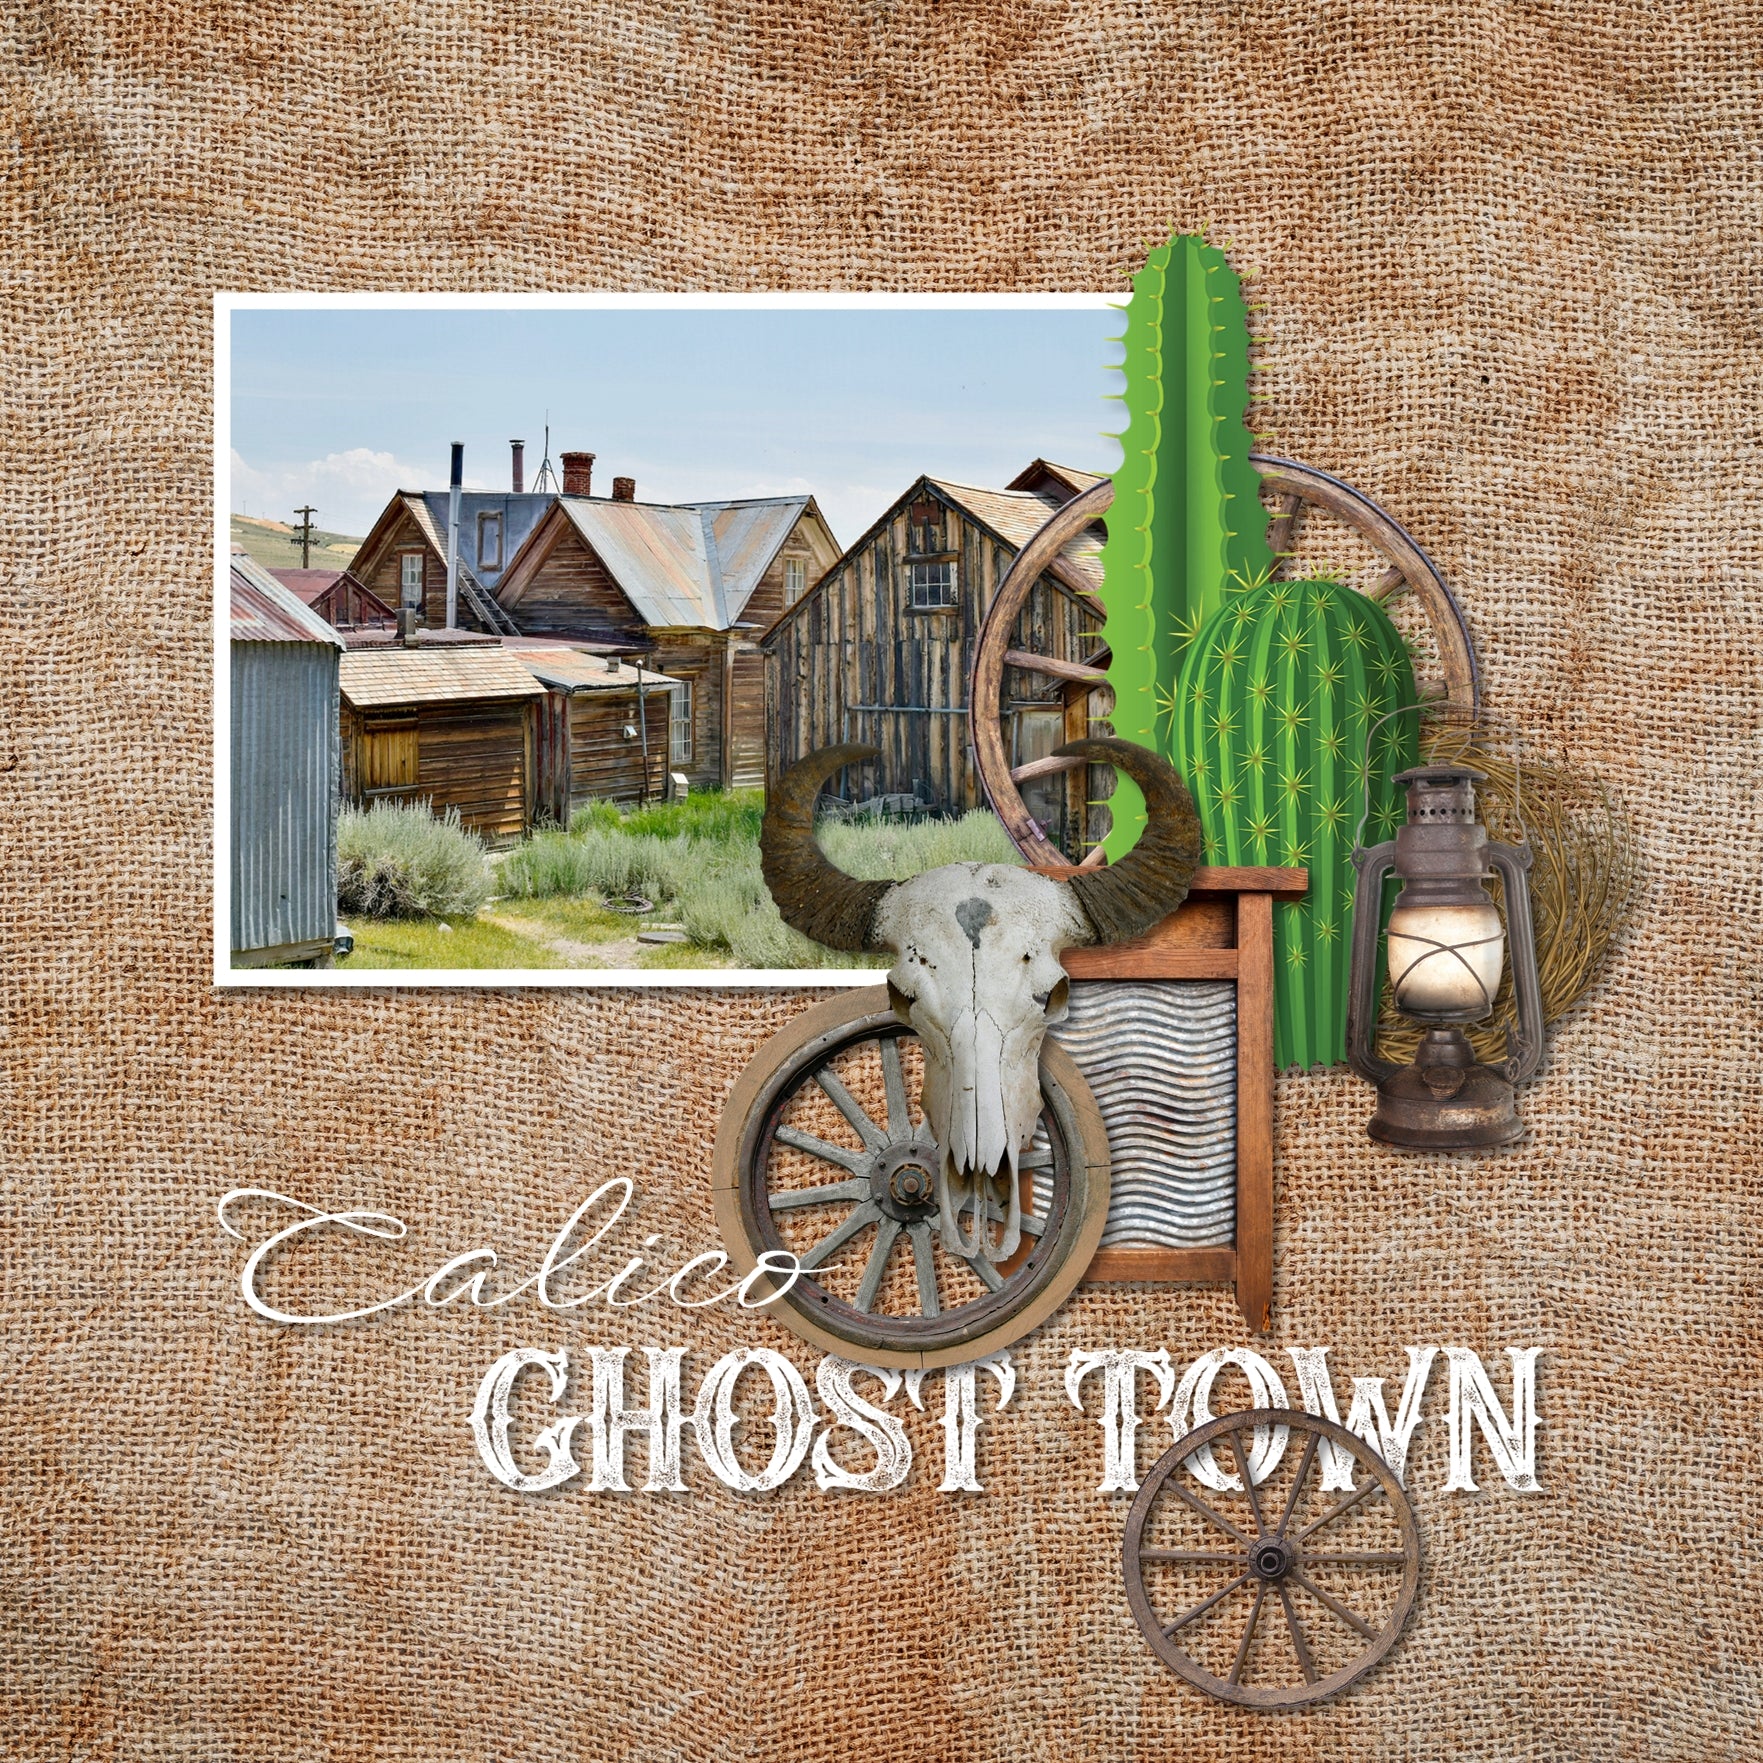 The Wild West Town Digital Scrapbook Bundle features authentic western and desert digital art embellishments, papers, clusters, and an alpha set. Easy to use for western-inspired digital scrapbook pages including travels to the Southwest (Arizona, Colorado, Utah, Nevada, New Mexico), cowboy and cowgirl dances and hoedowns, rodeo and ranch events, ghost towns, vacations to the desert, Mexico, and so much more!